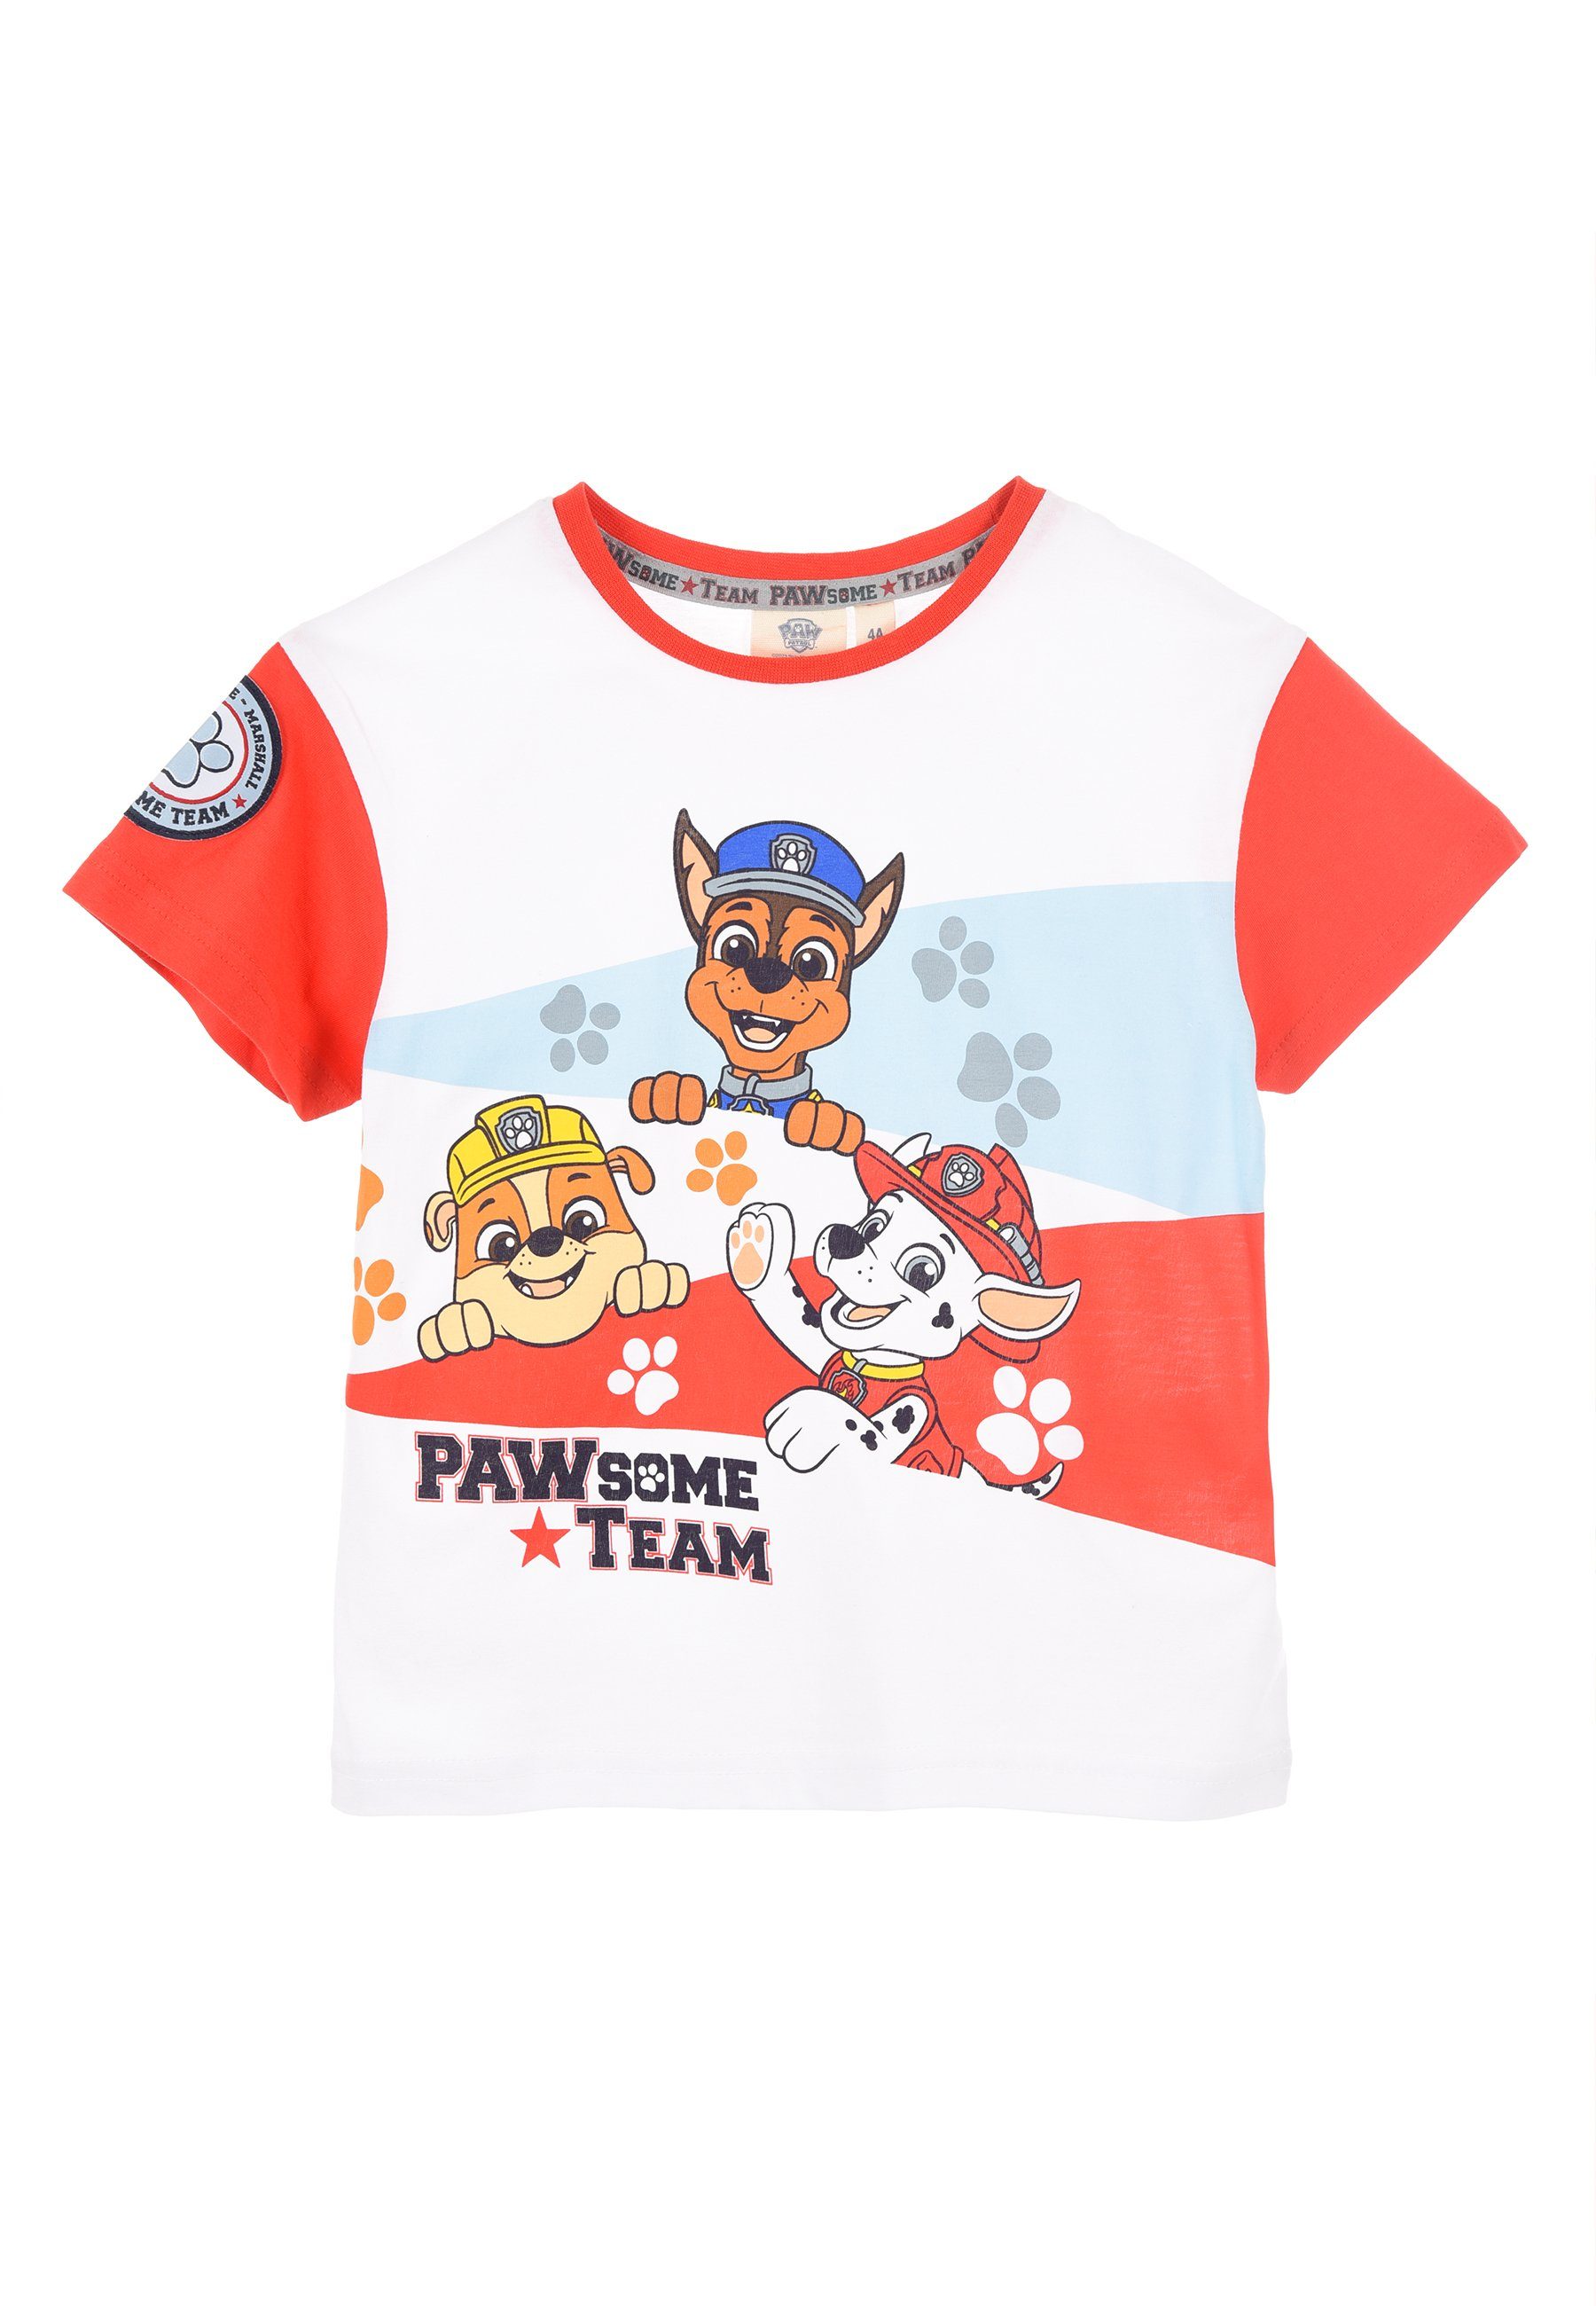 PAW PATROL T-Shirt Chase Marshall Rubble Kinder T-Shirt Oberteil Jungen Rot